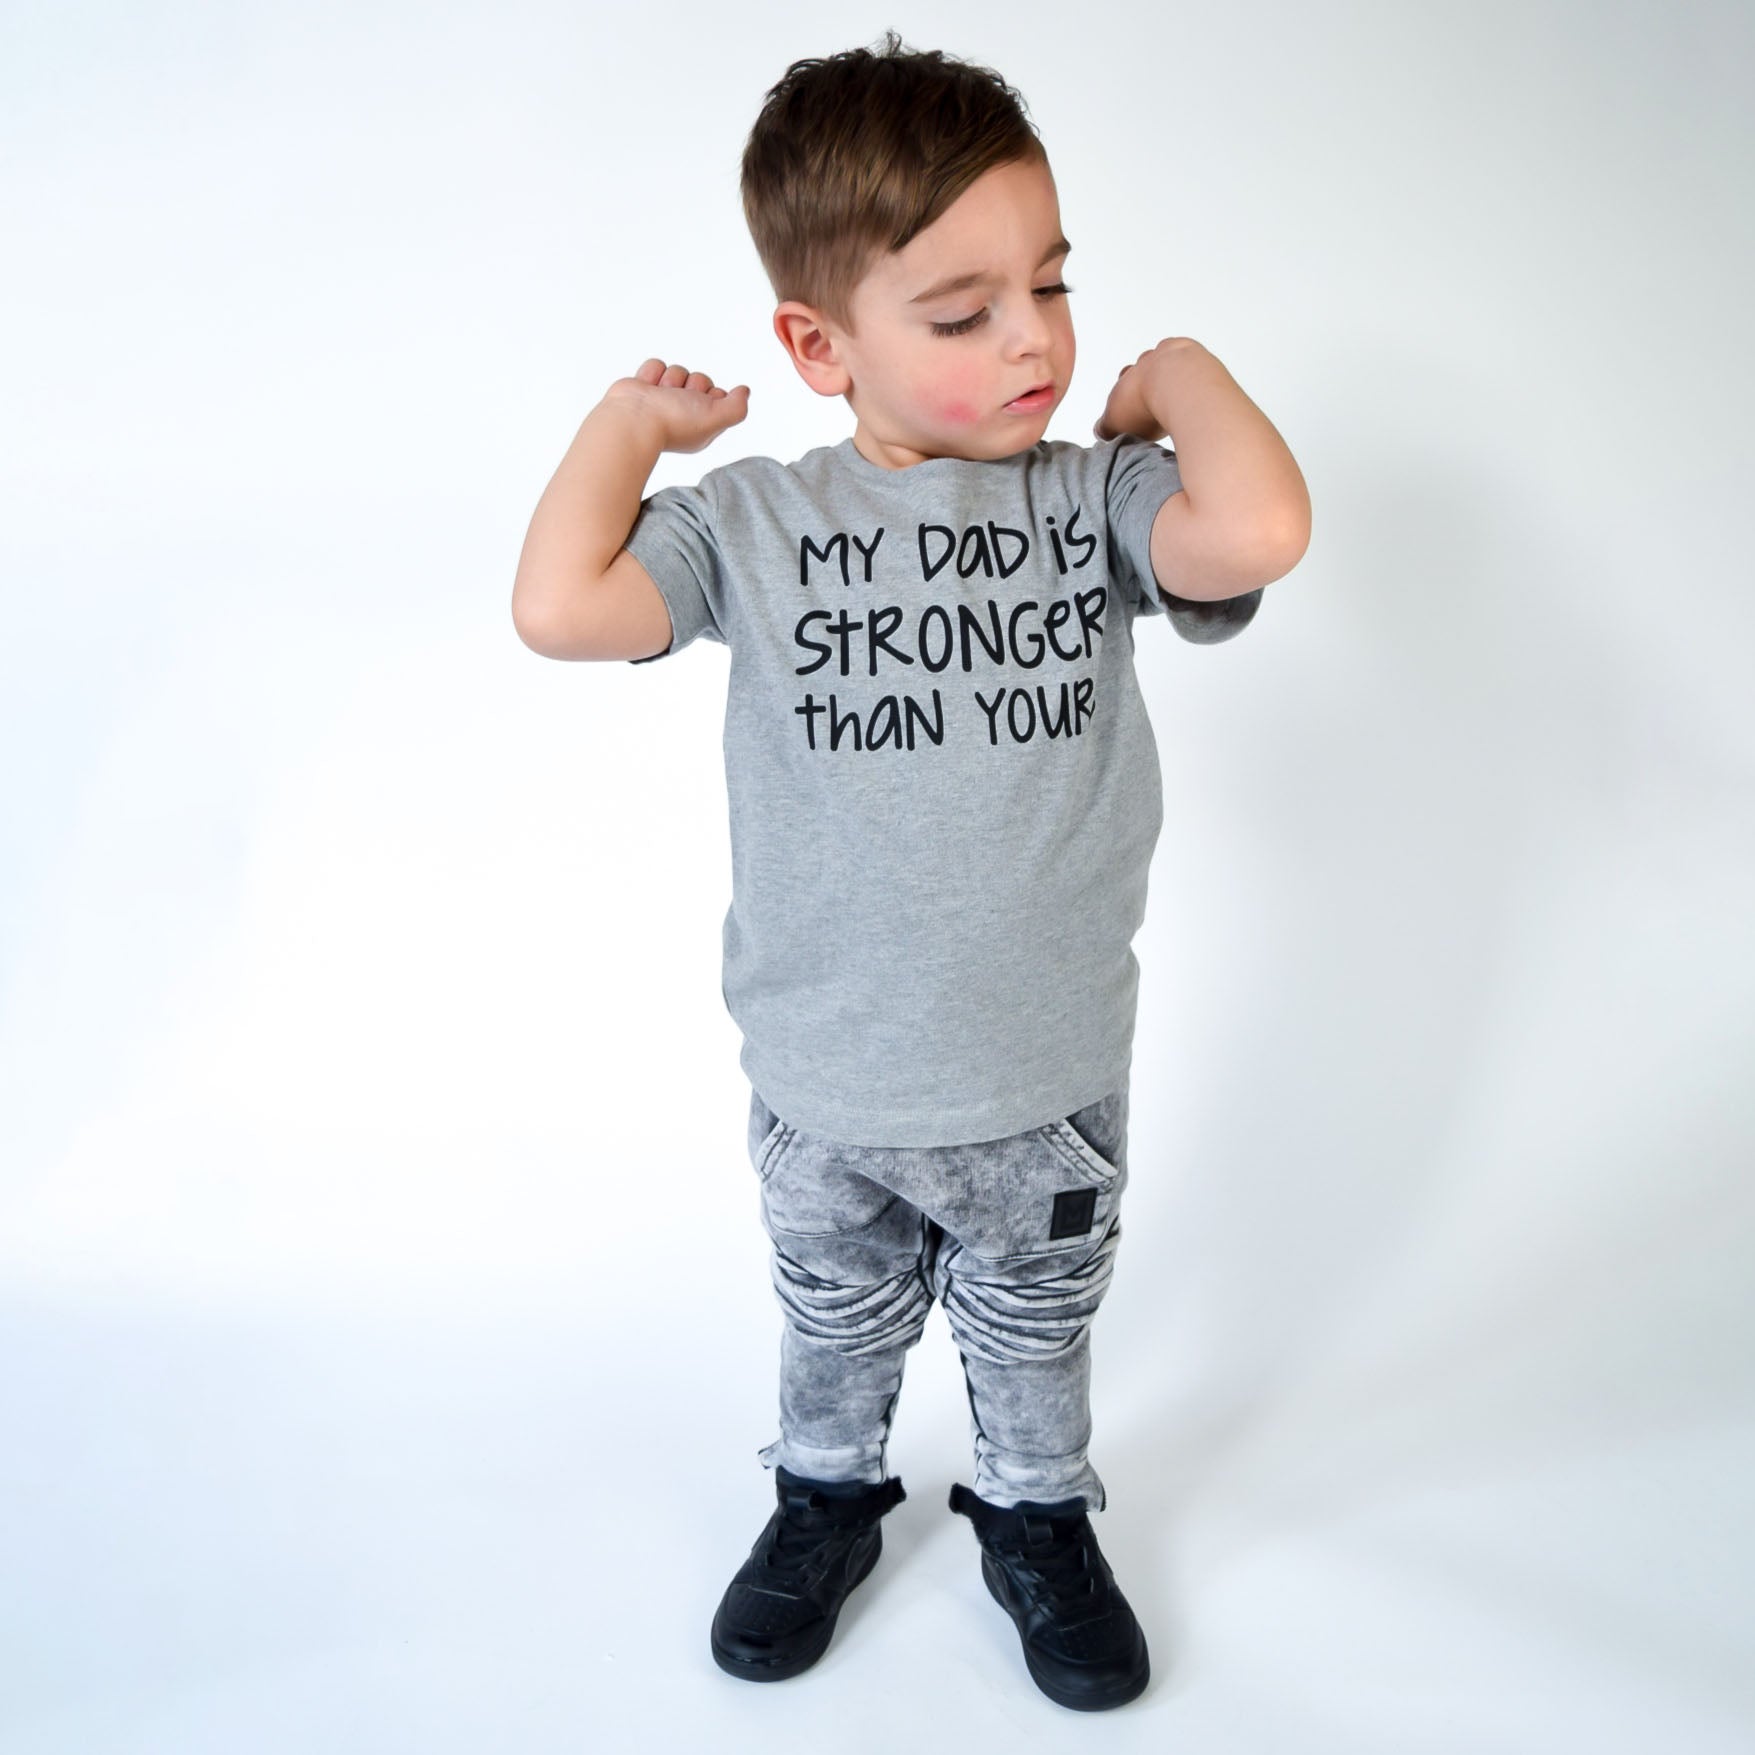 'My dad is stronger than yours' kids shortsleeve shirt